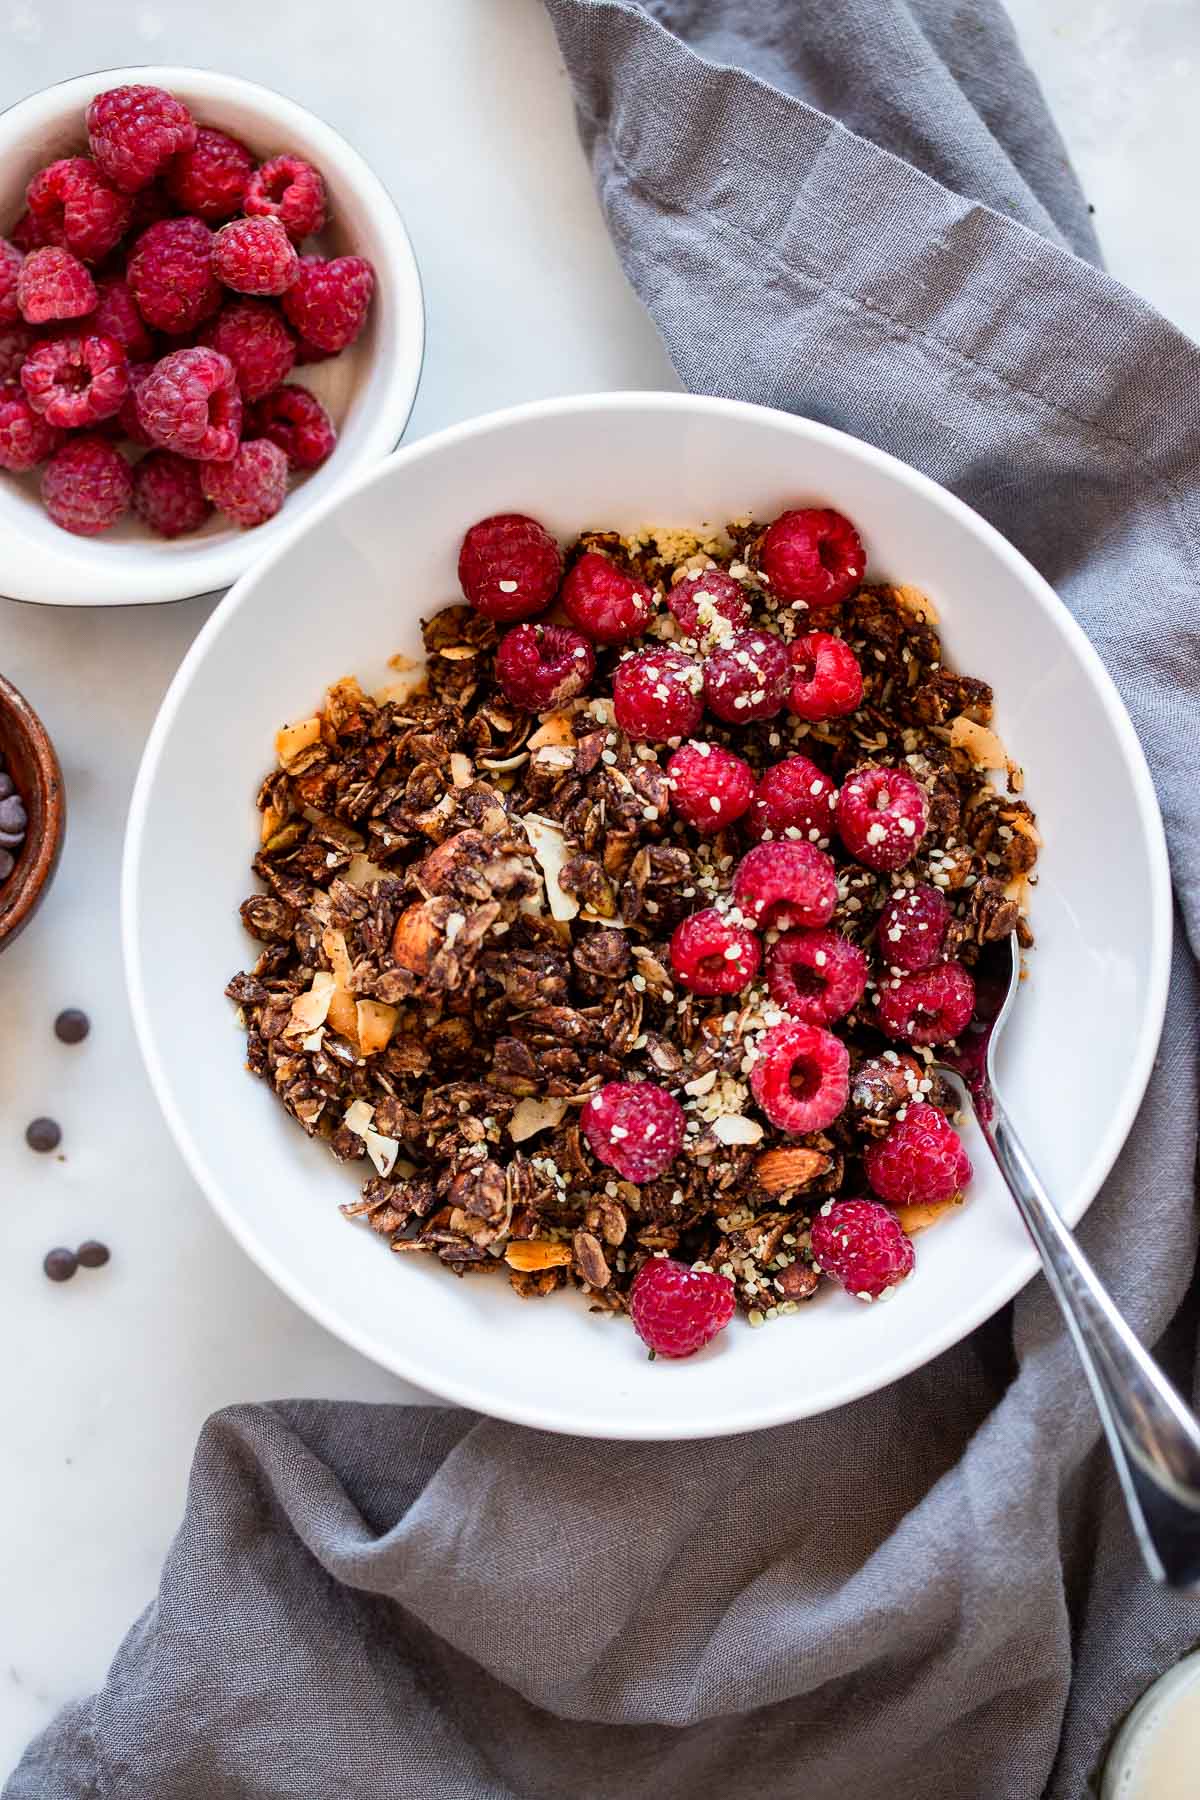 chocolate granola in bowl with fresh raspberries and soy milk.